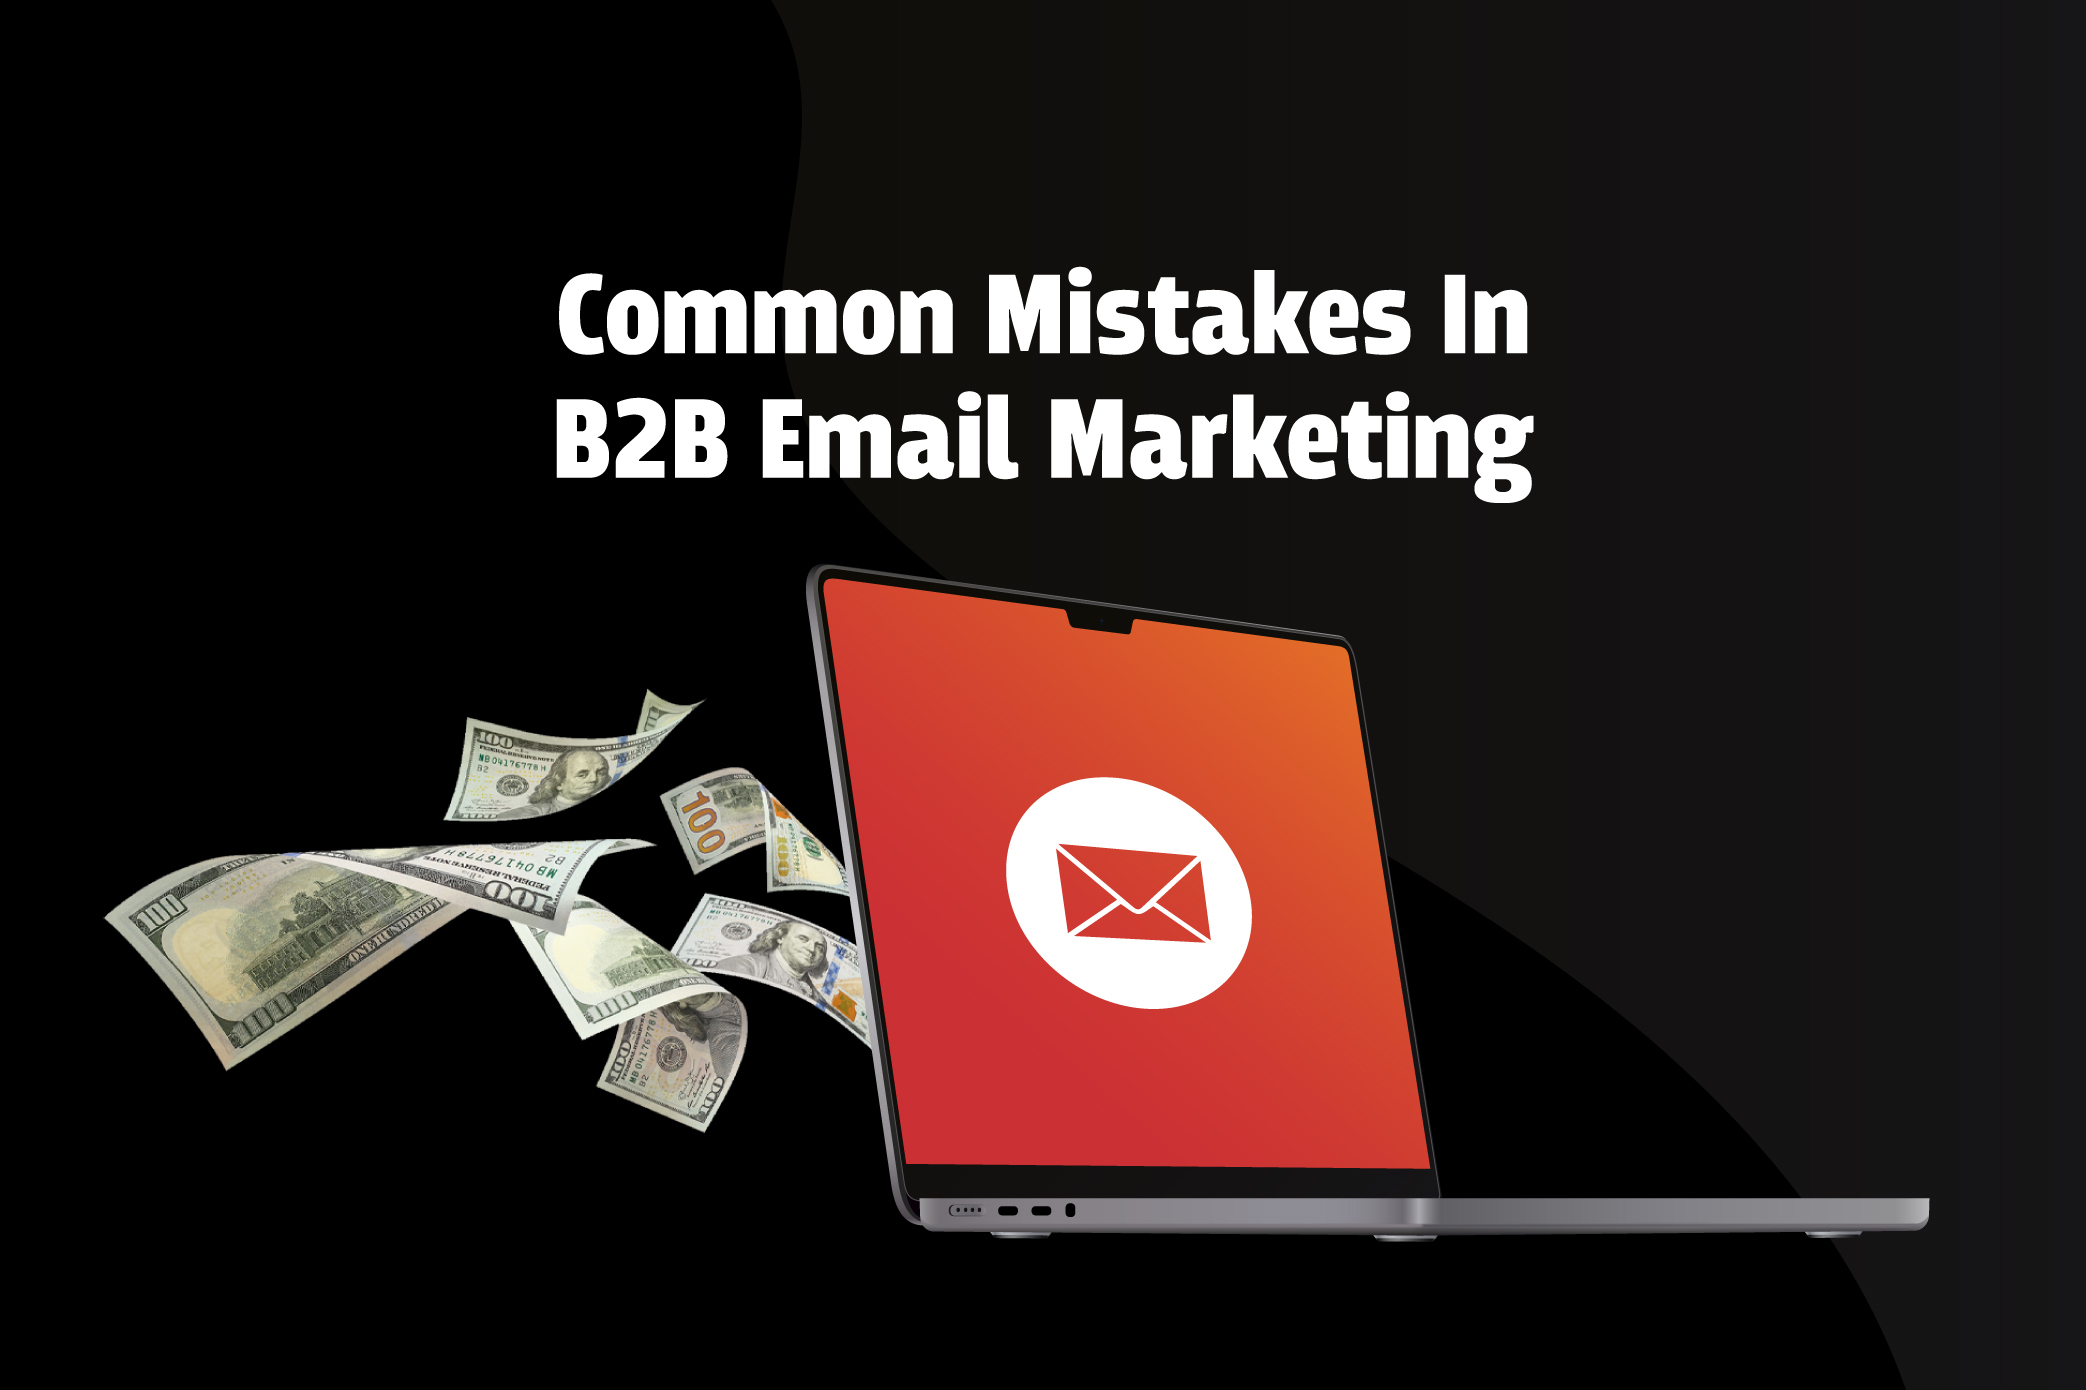 Common Mistakes in B2B Email Marketing (And How to Fix Them!)